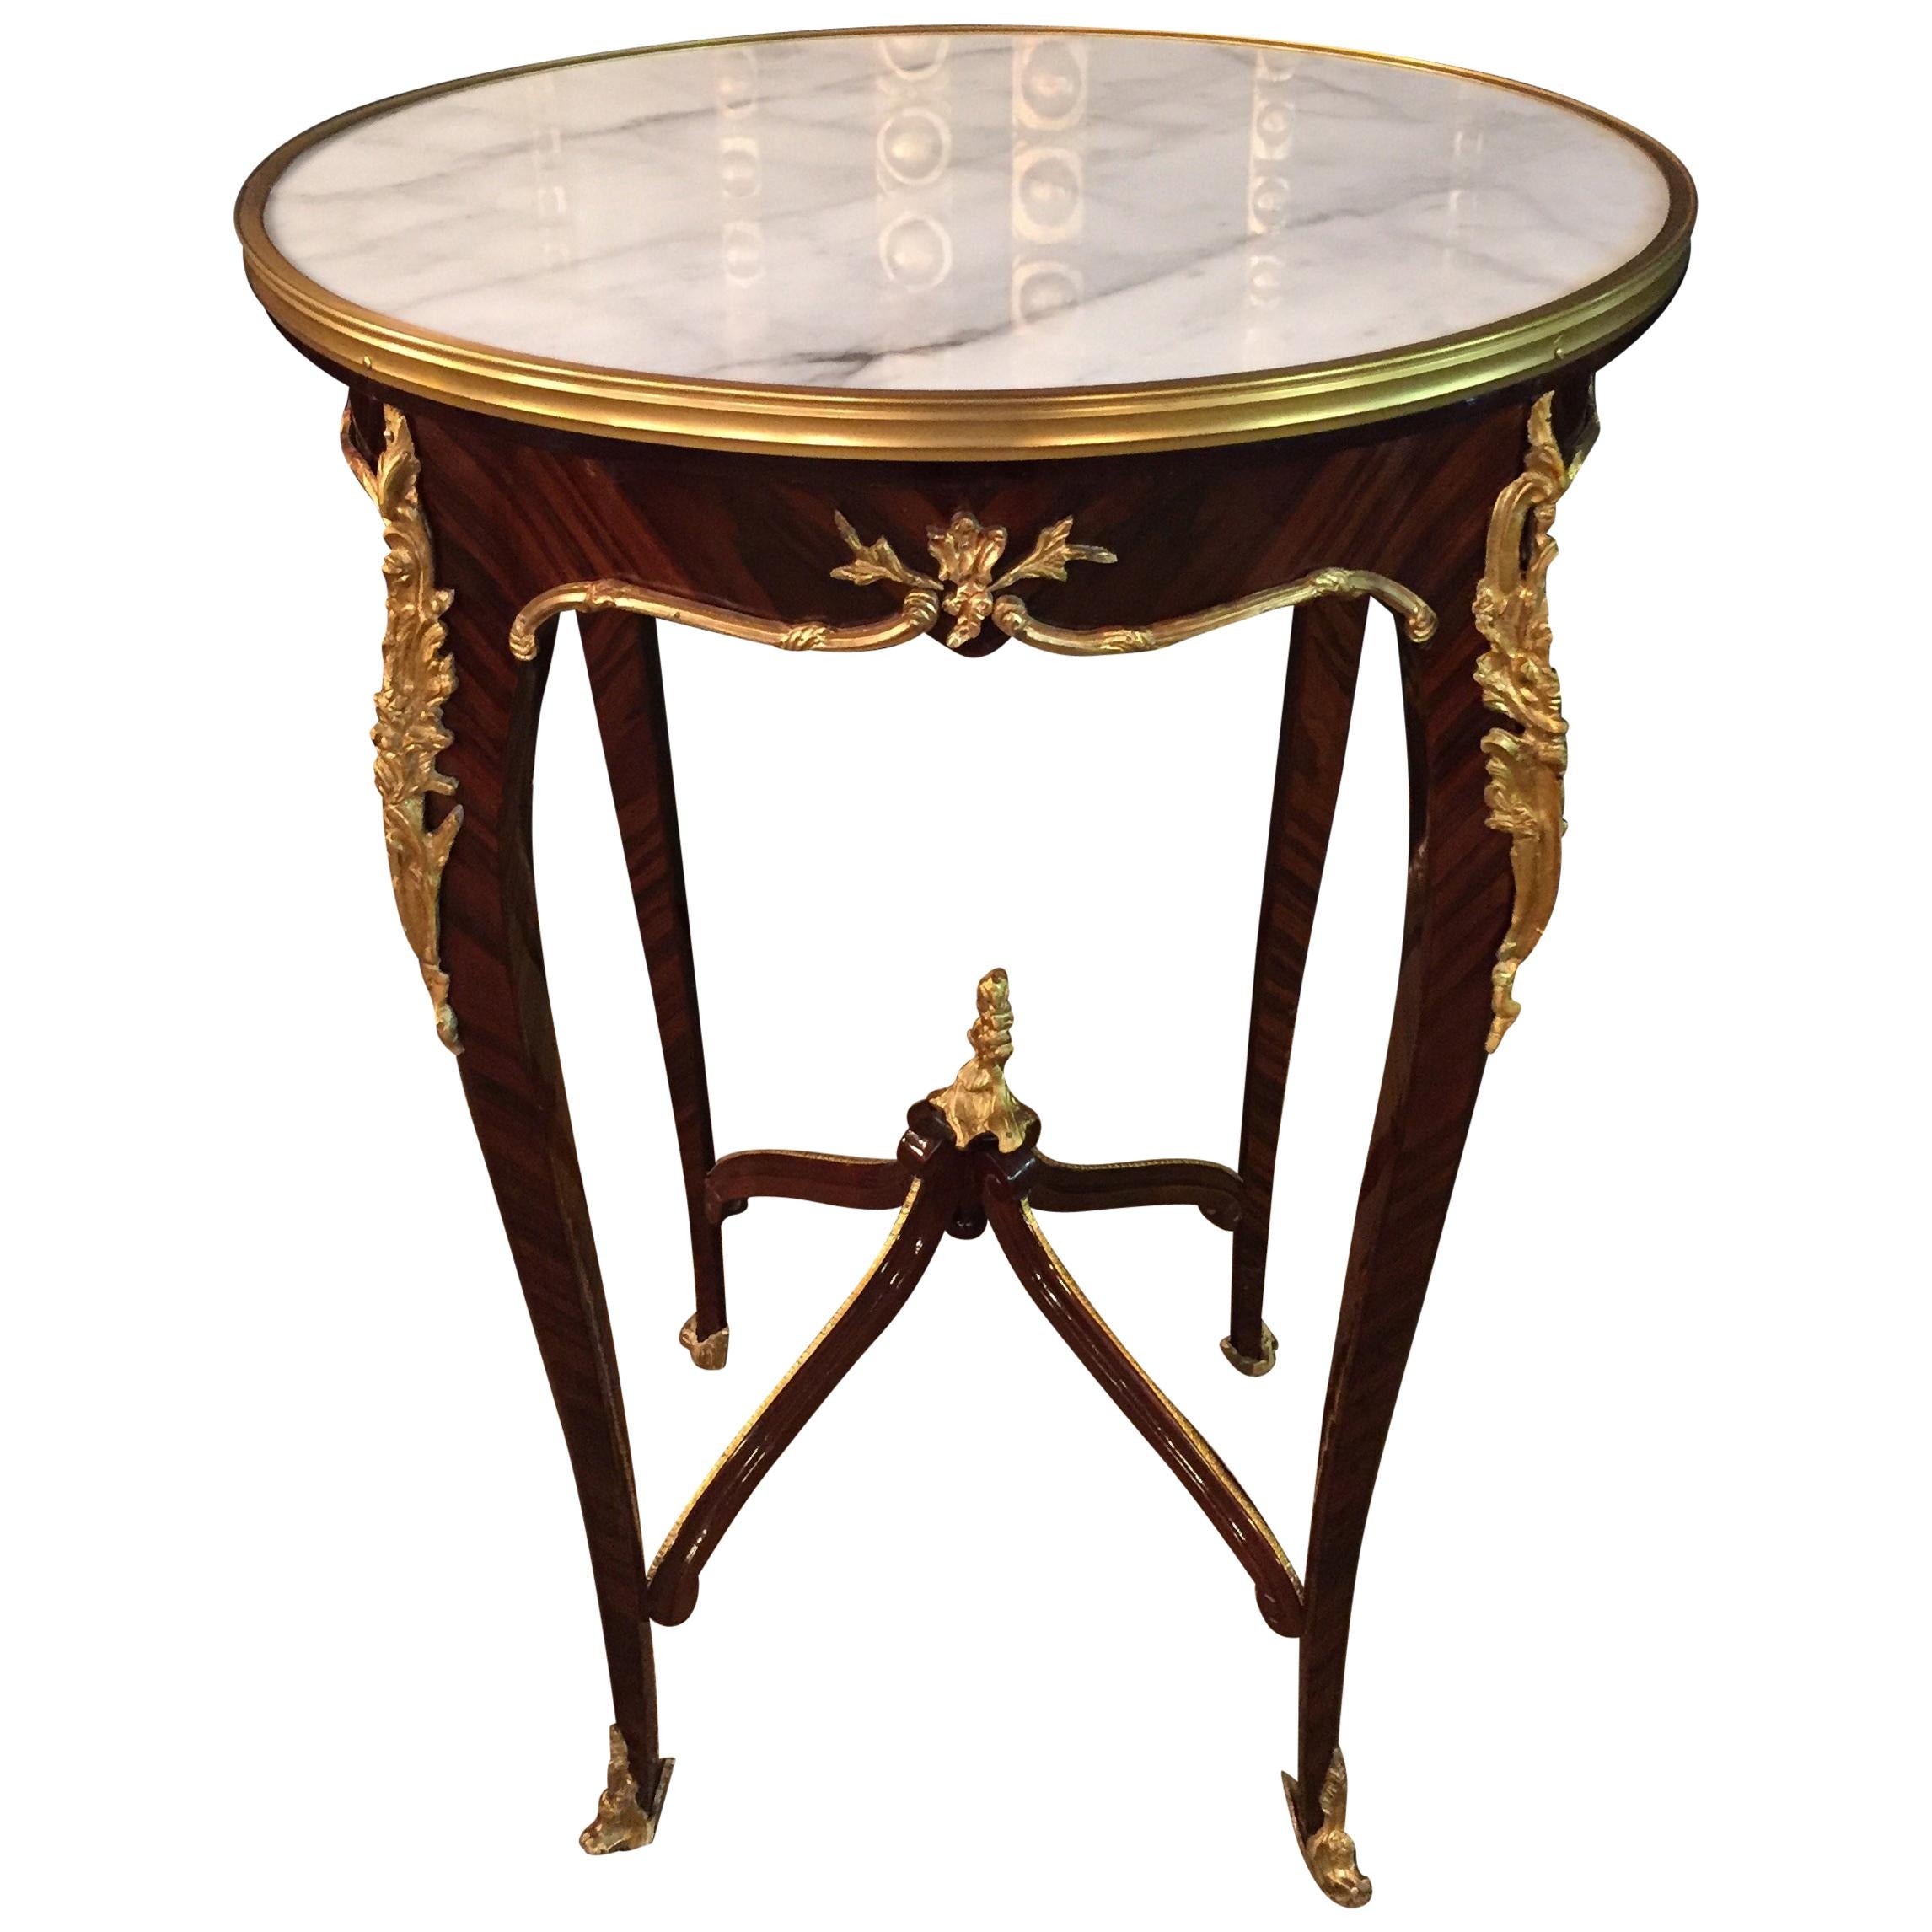 20th Century French Salon Side Table in Louis Quinze with White Marble